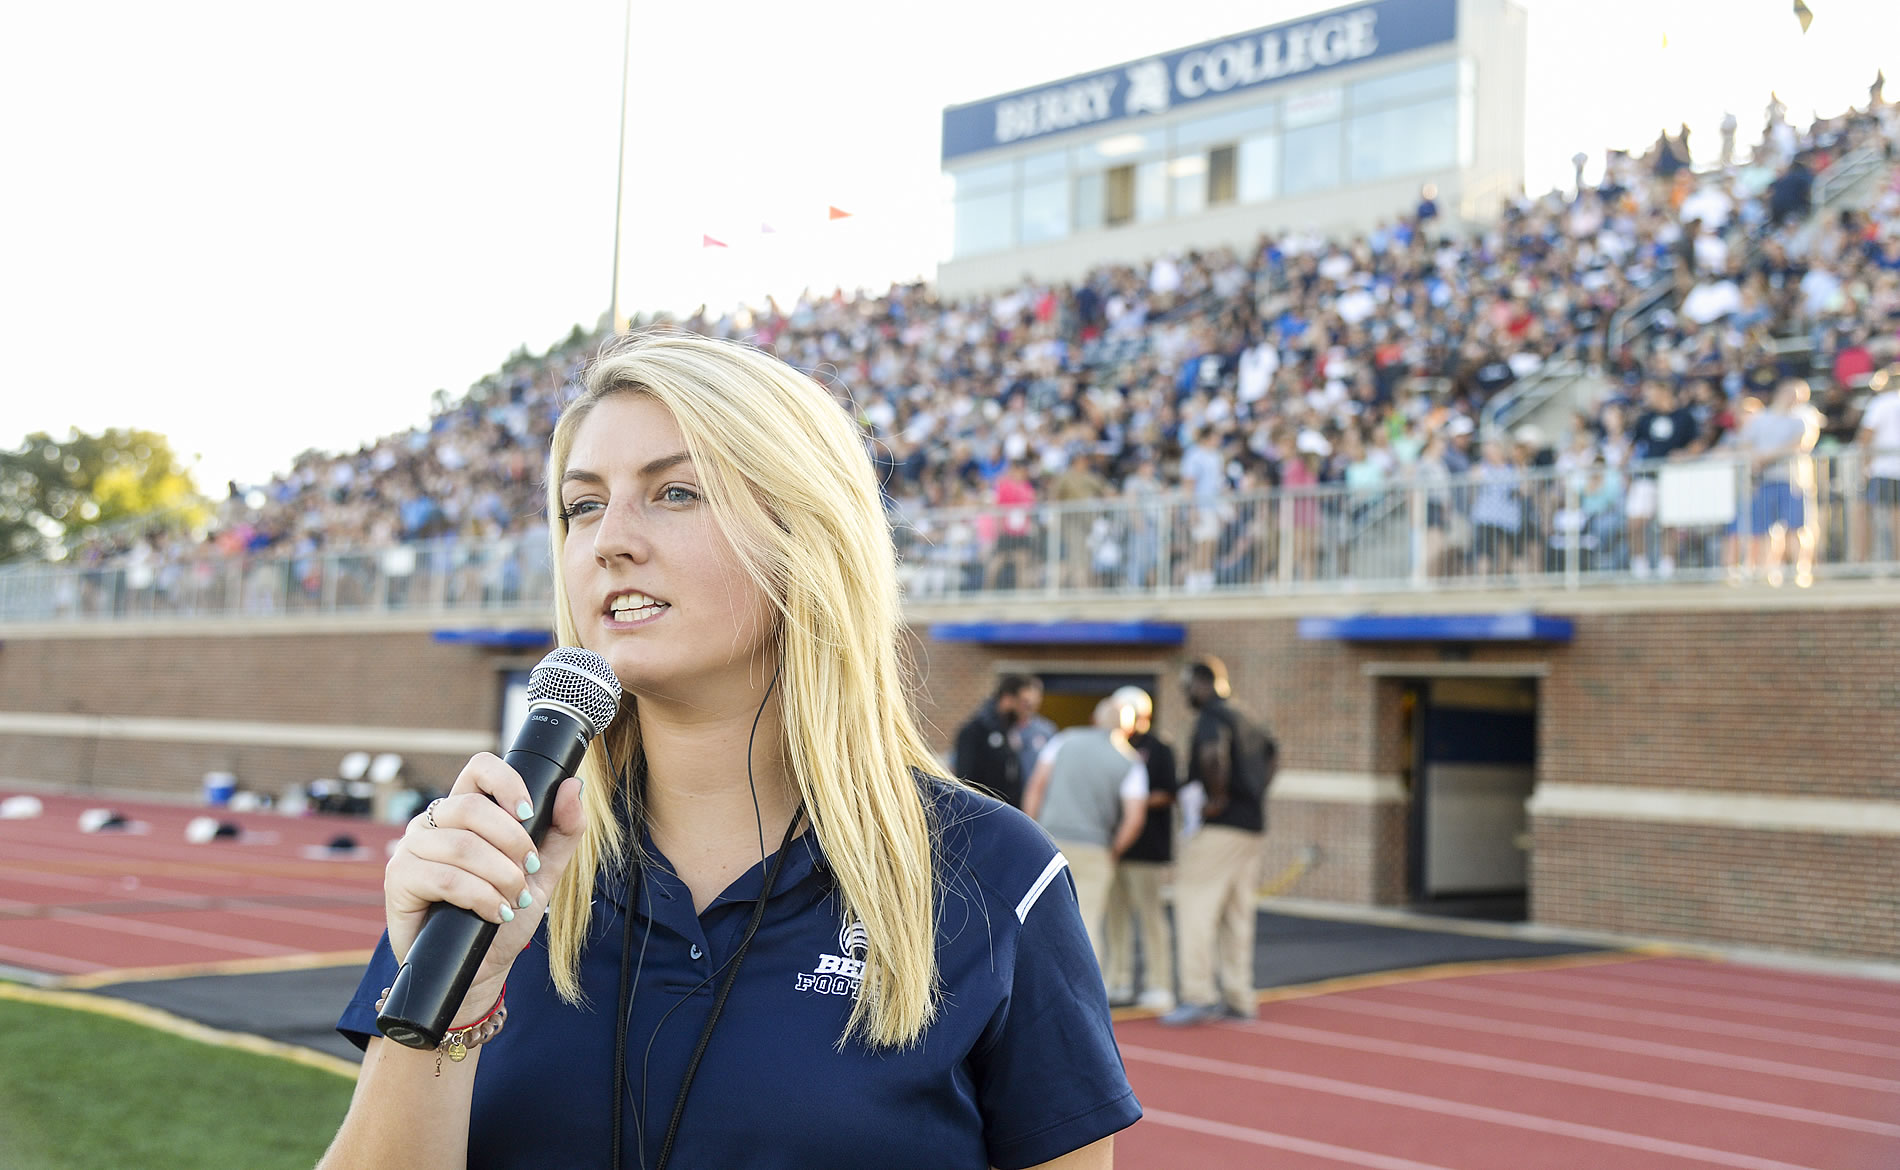 Student announcing a sports game